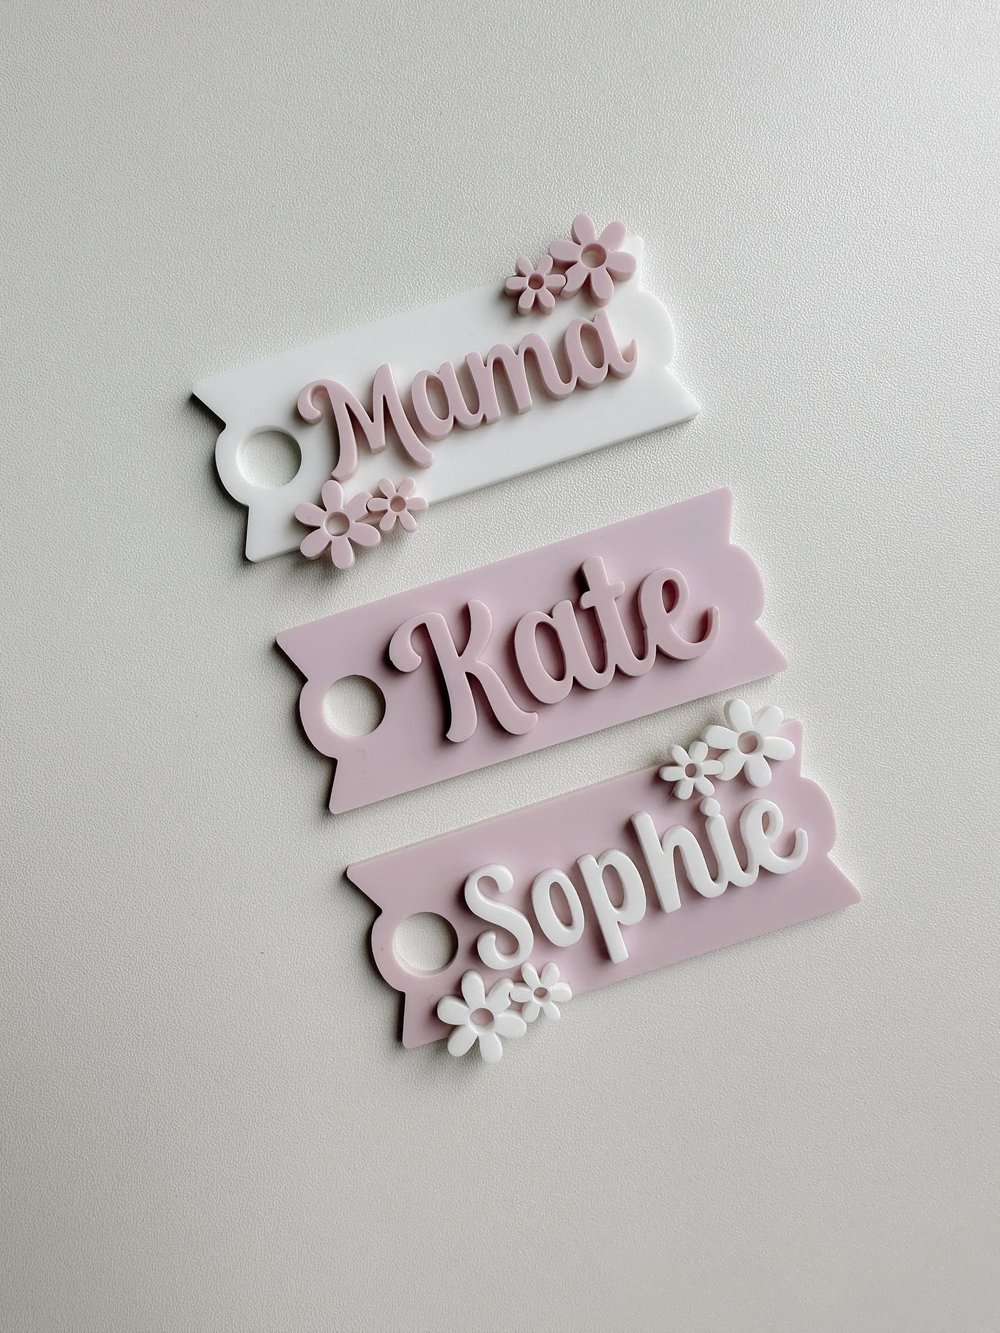 Stanley Cup Name Tags – simplybysj